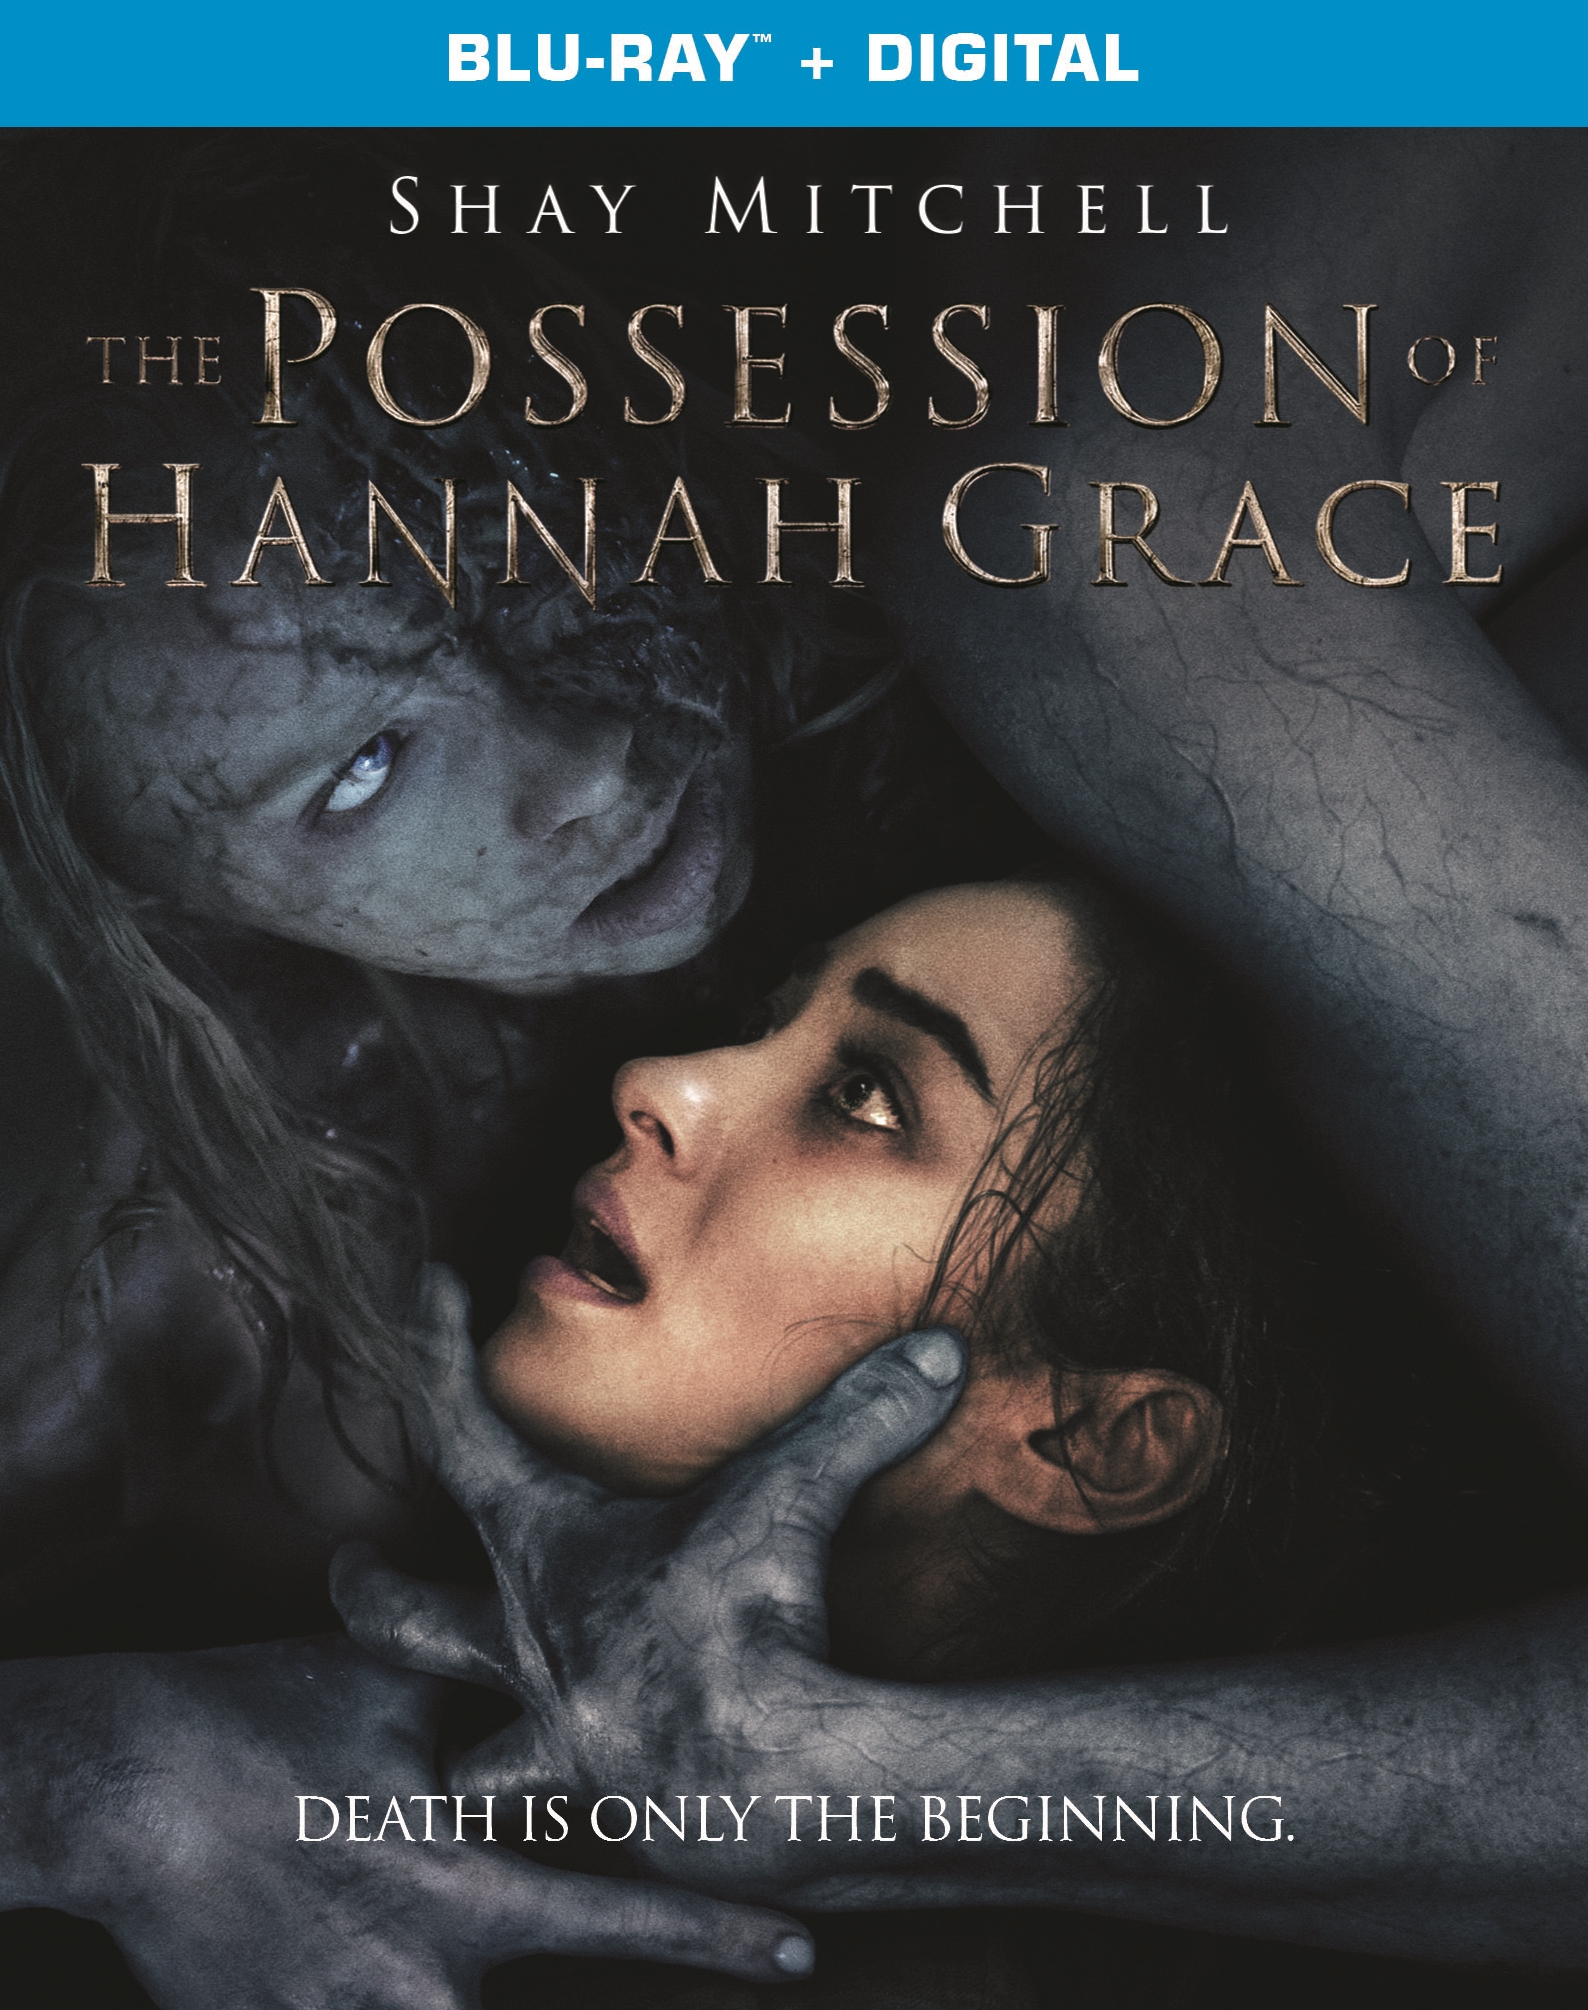 The Possession of Hannah Grace [Blu-ray] [2018] - Best Buy